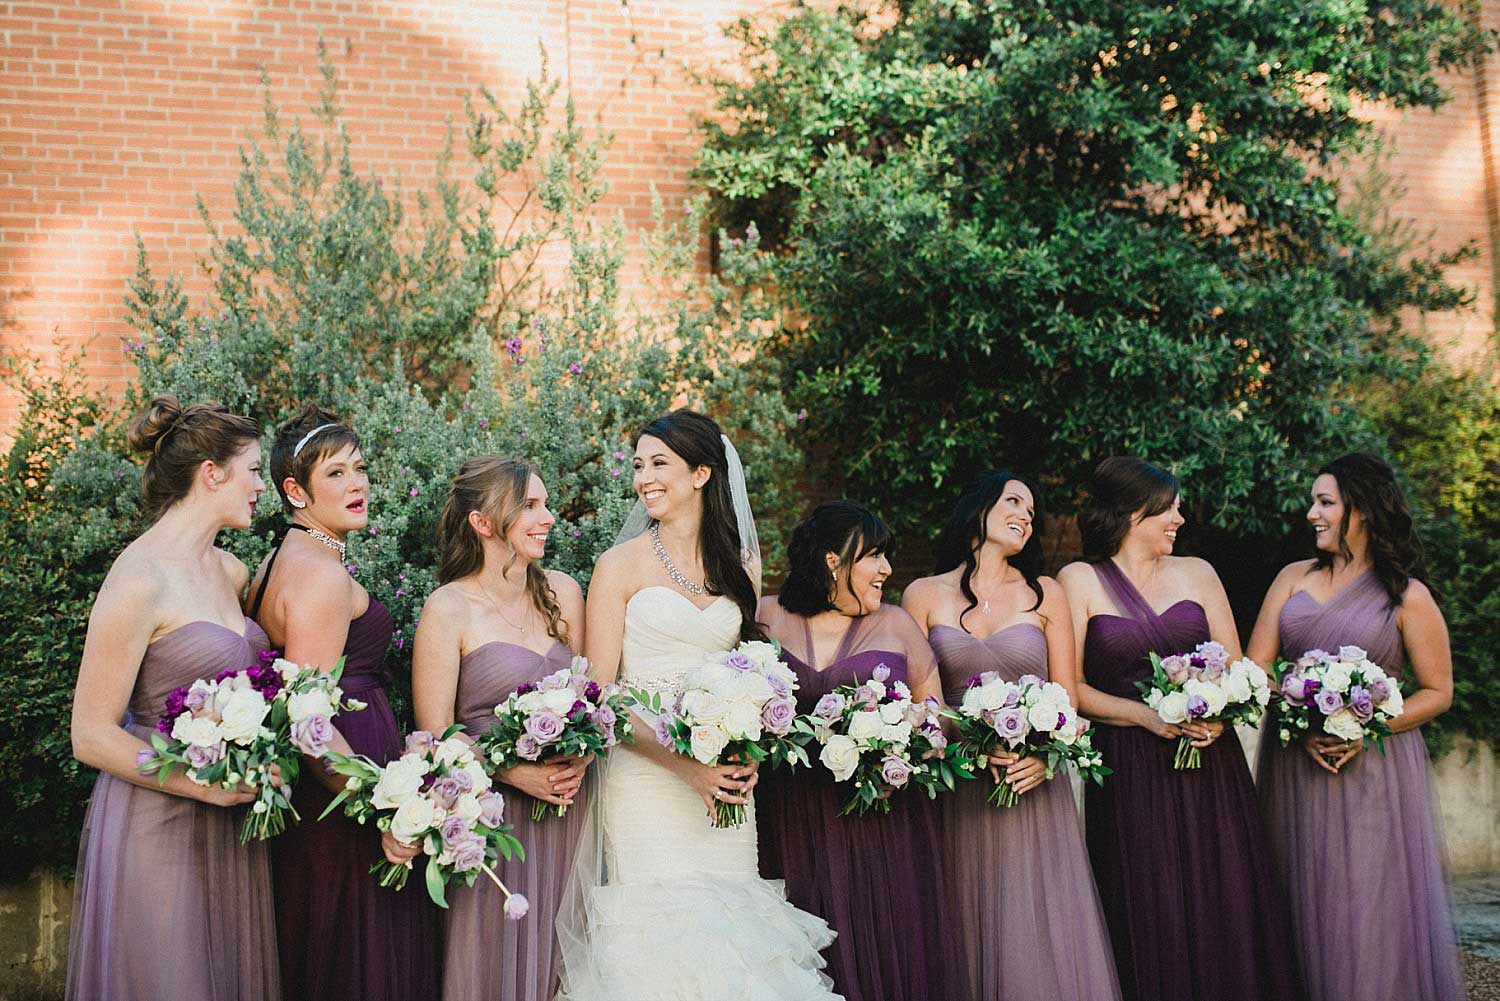 809 at Vickery wedding bridesmaids in lavender and purple bridesmaid dresses in courtyard